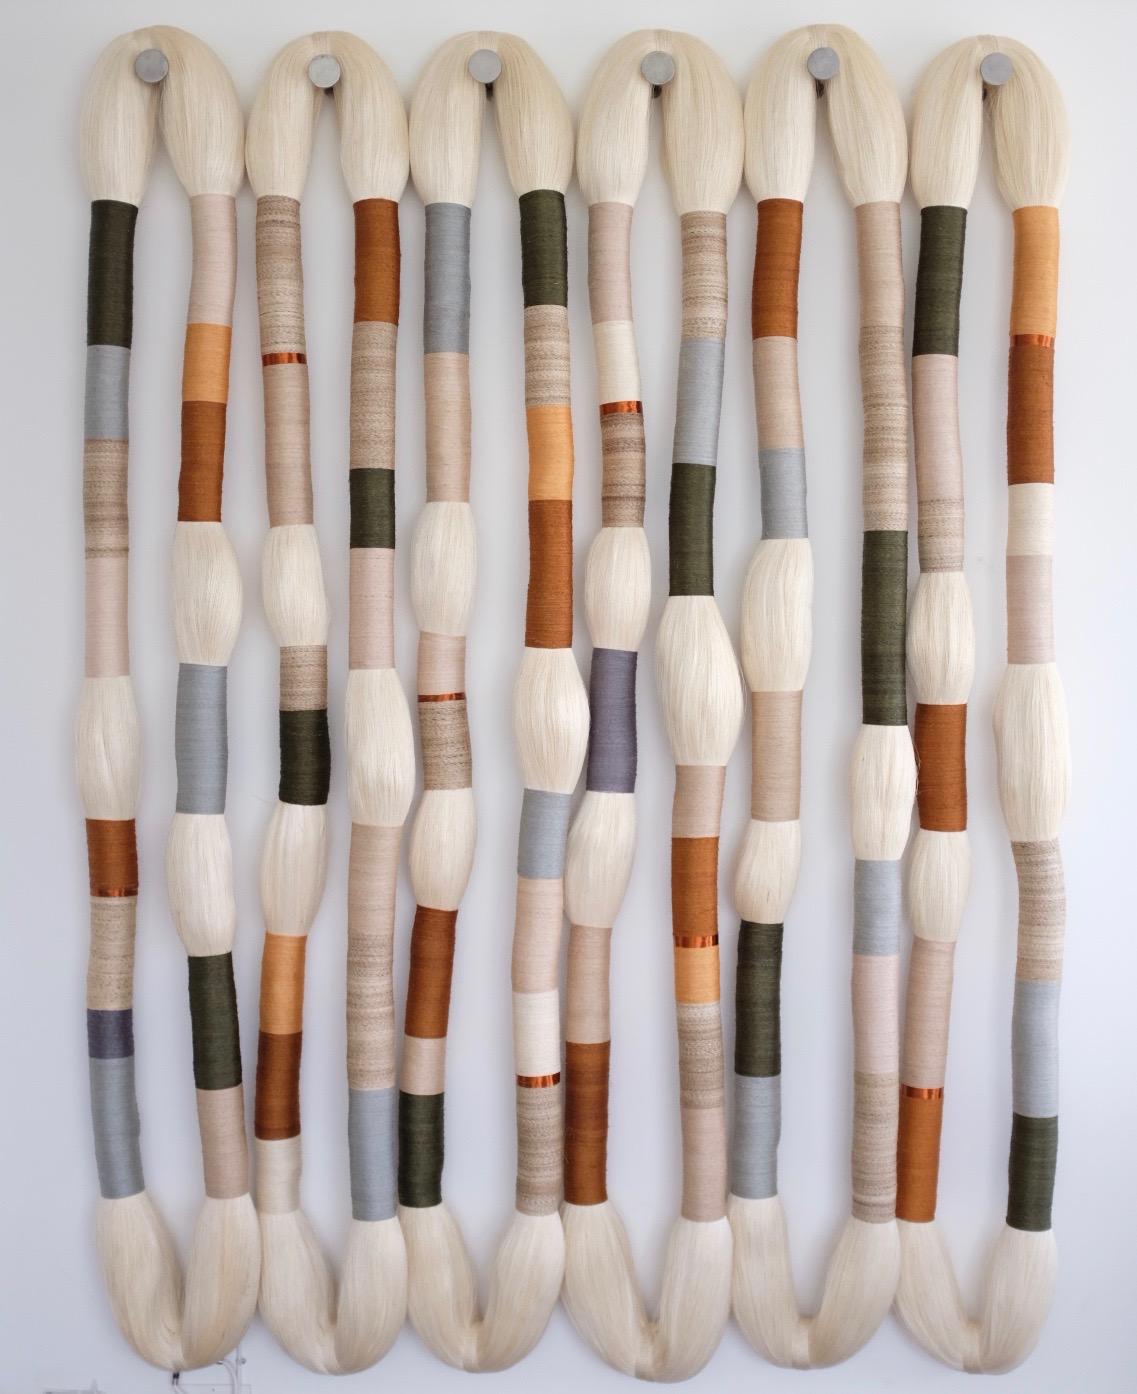 6 Ropes by Alejandra Artizabal
Dimensions: 156 cm x 200 cm
Materials: Fique - Furcraea andina .The plant is transformed manually into textiles and ropes and used
in various applications in agriculture, handicrafts and other products.

We are